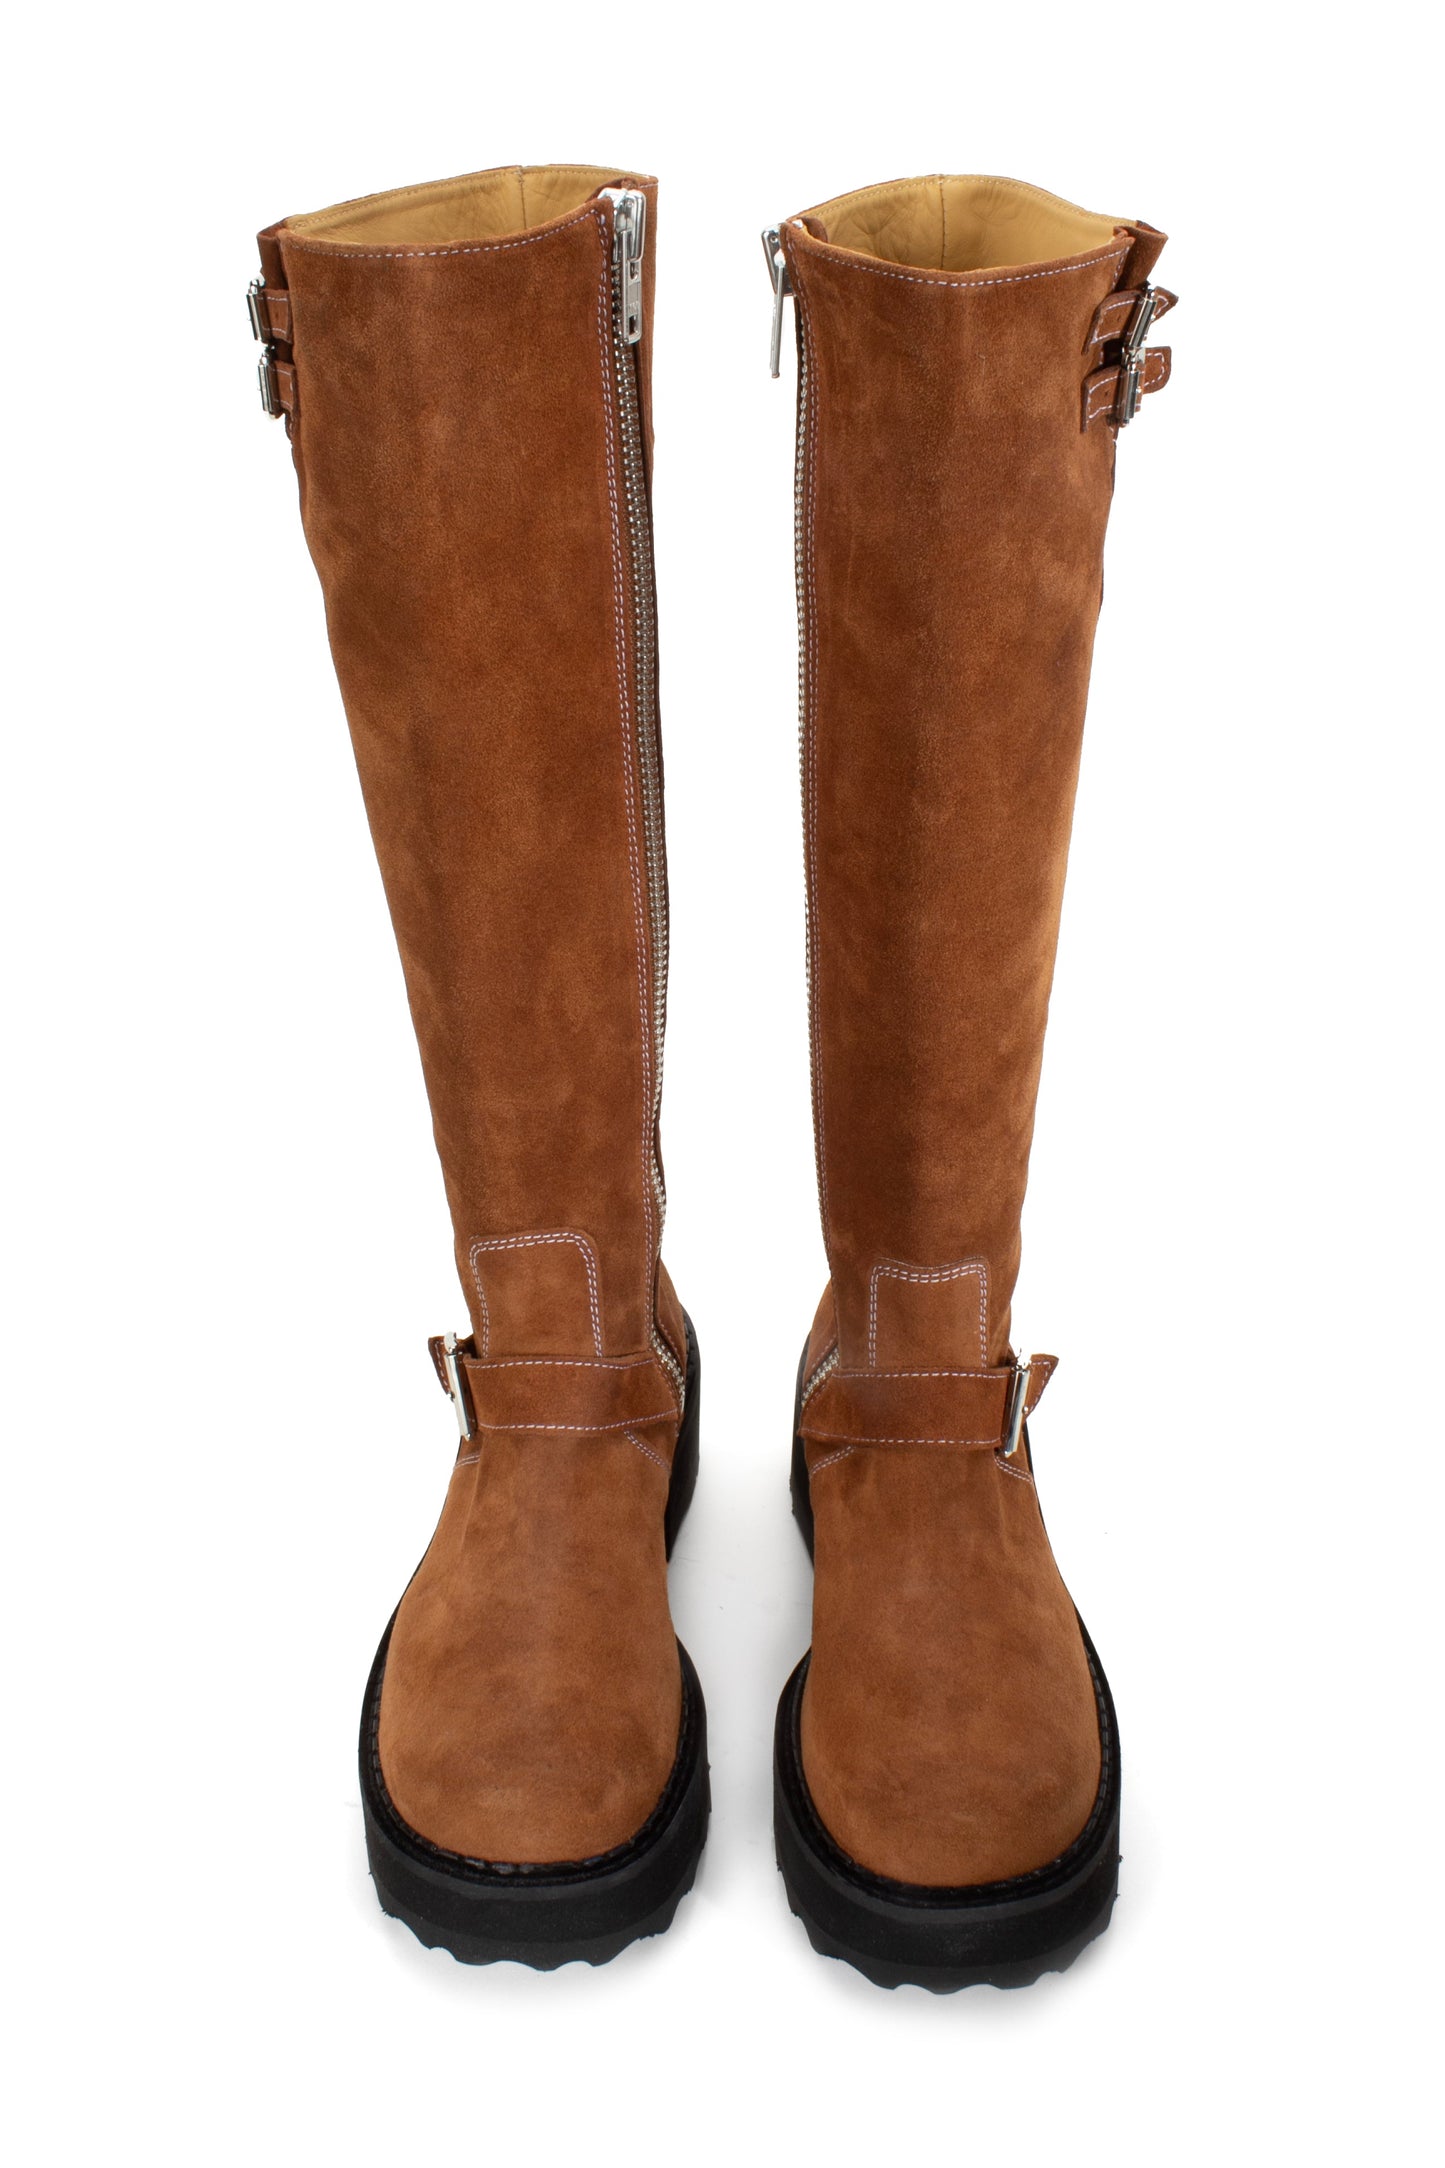 Boots in Brown are an under-the-knee-high, silver buckles with white stiches